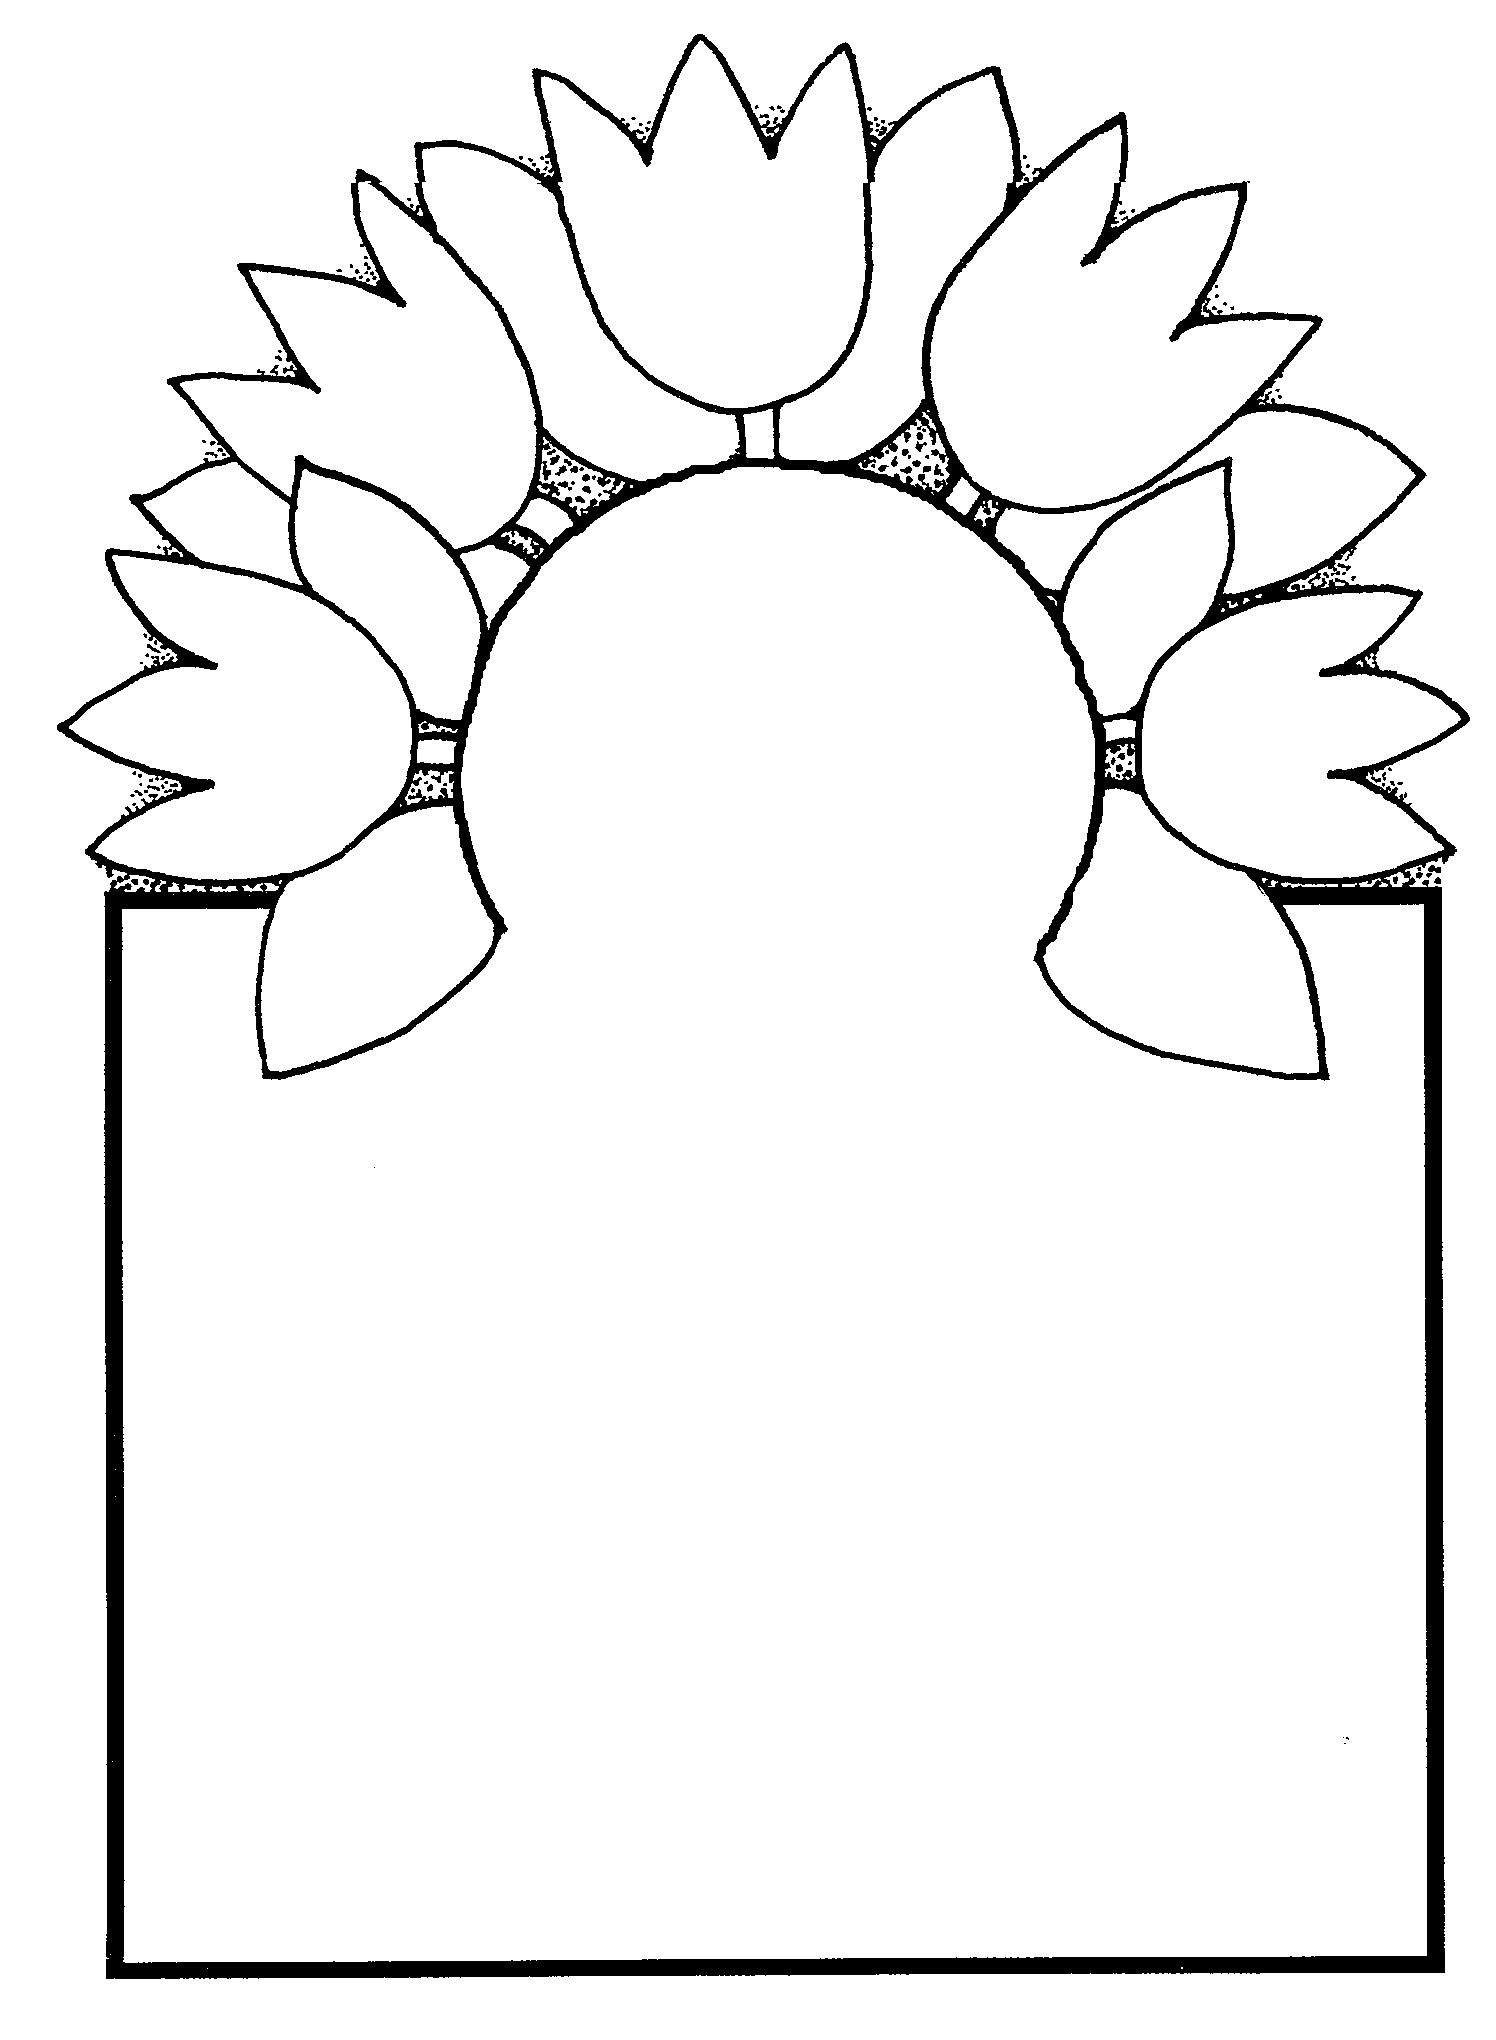 Black And White Page Border - Clipart library